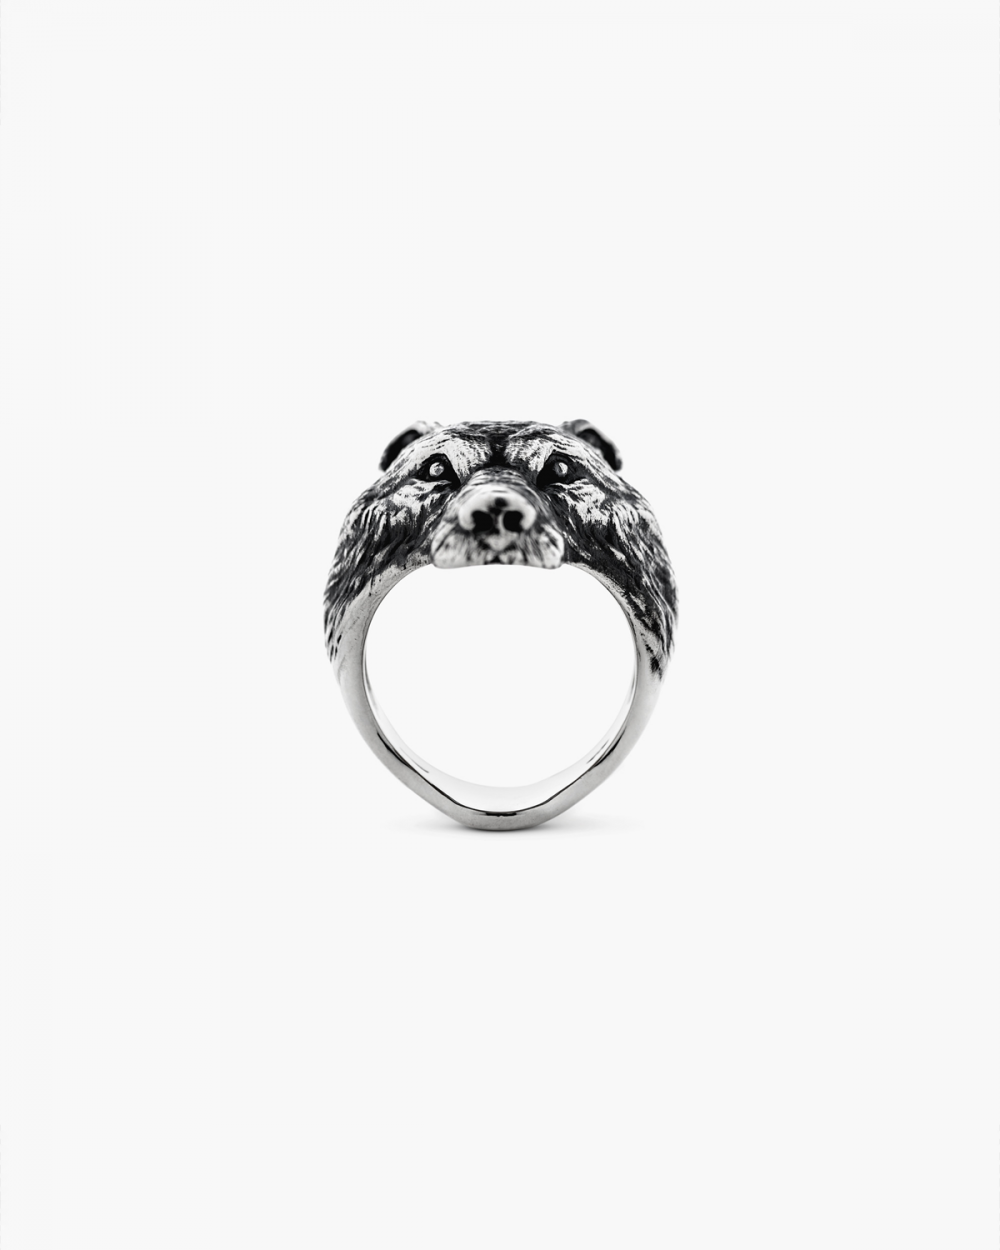 Archive Sale WOLF RING NOVE25